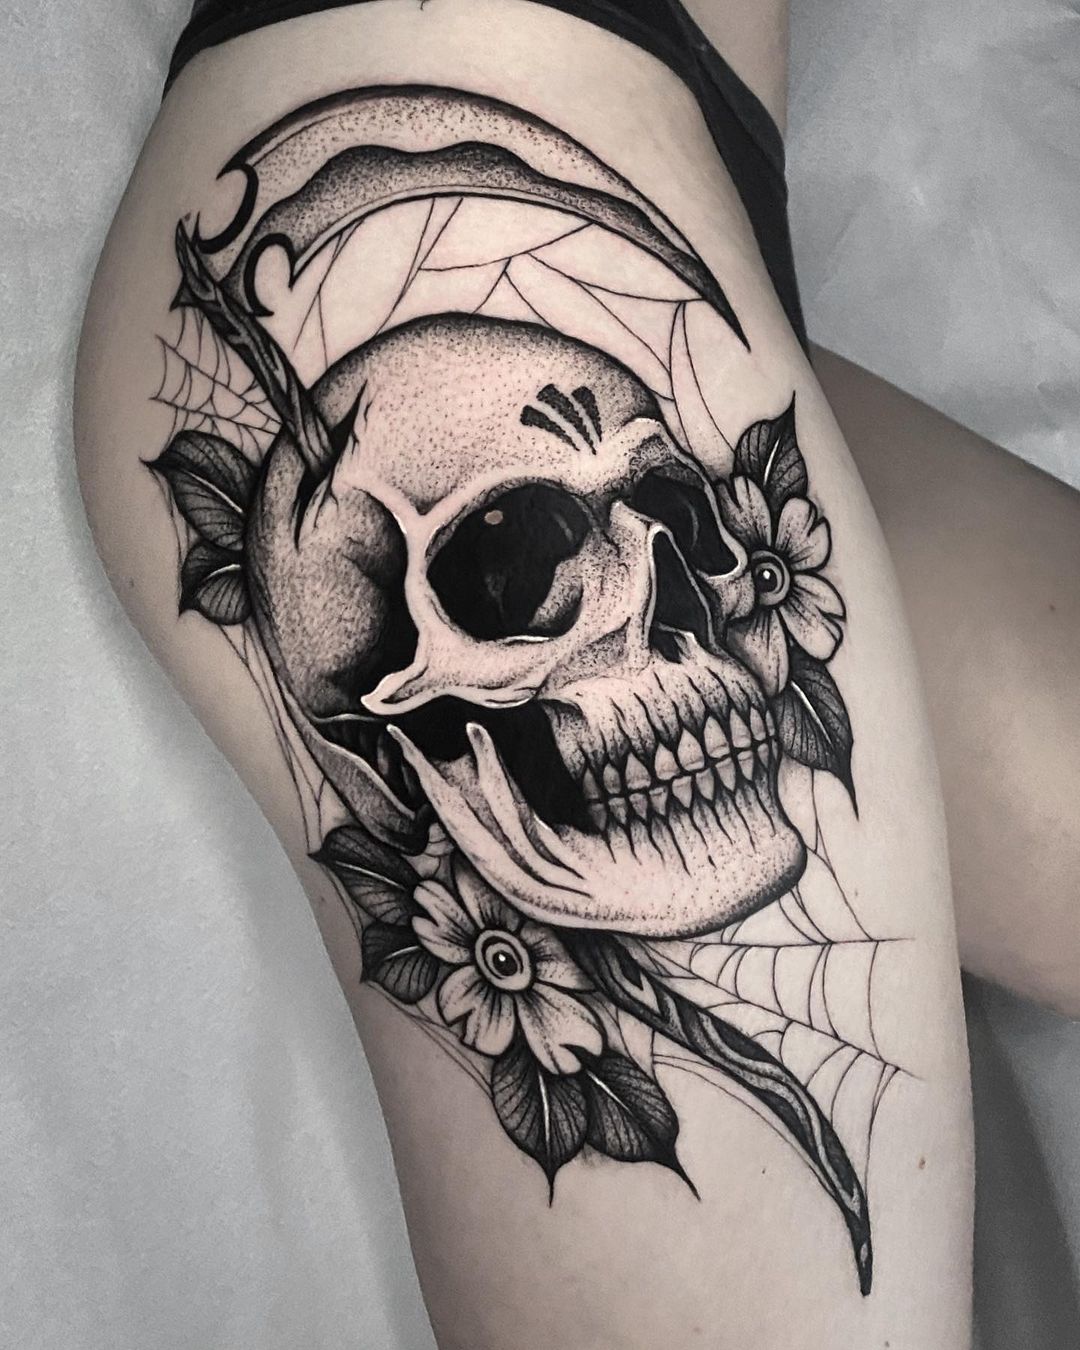 Dotwork Skull With Spider Web Tattoo